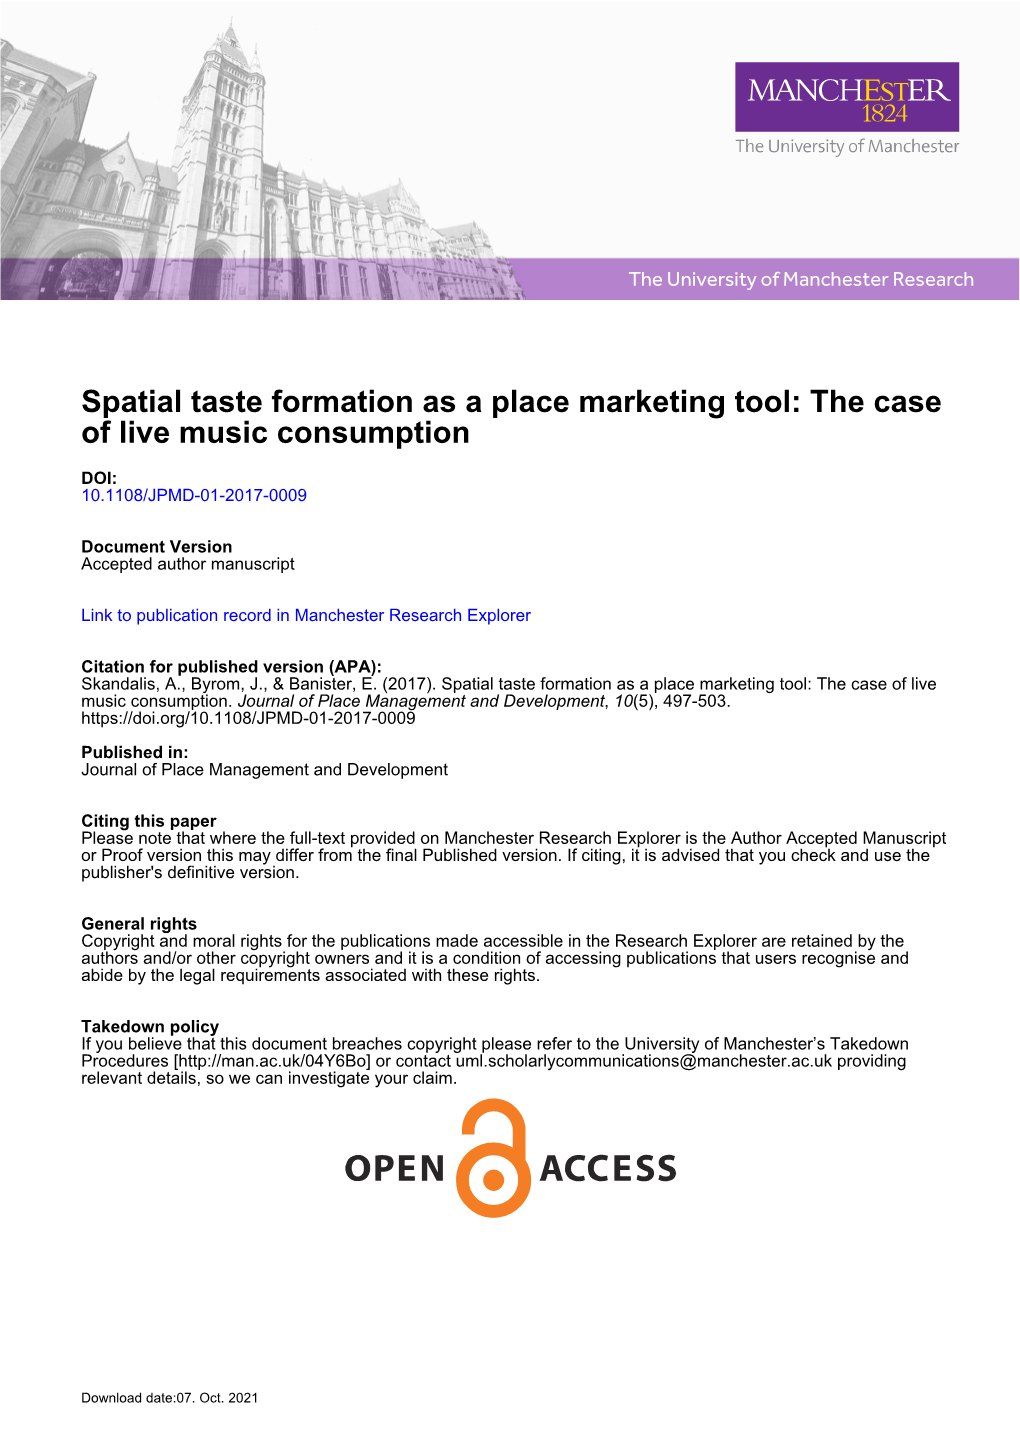 Spatial Taste Formation As a Place Marketing Tool: the Case of Live Music Consumption